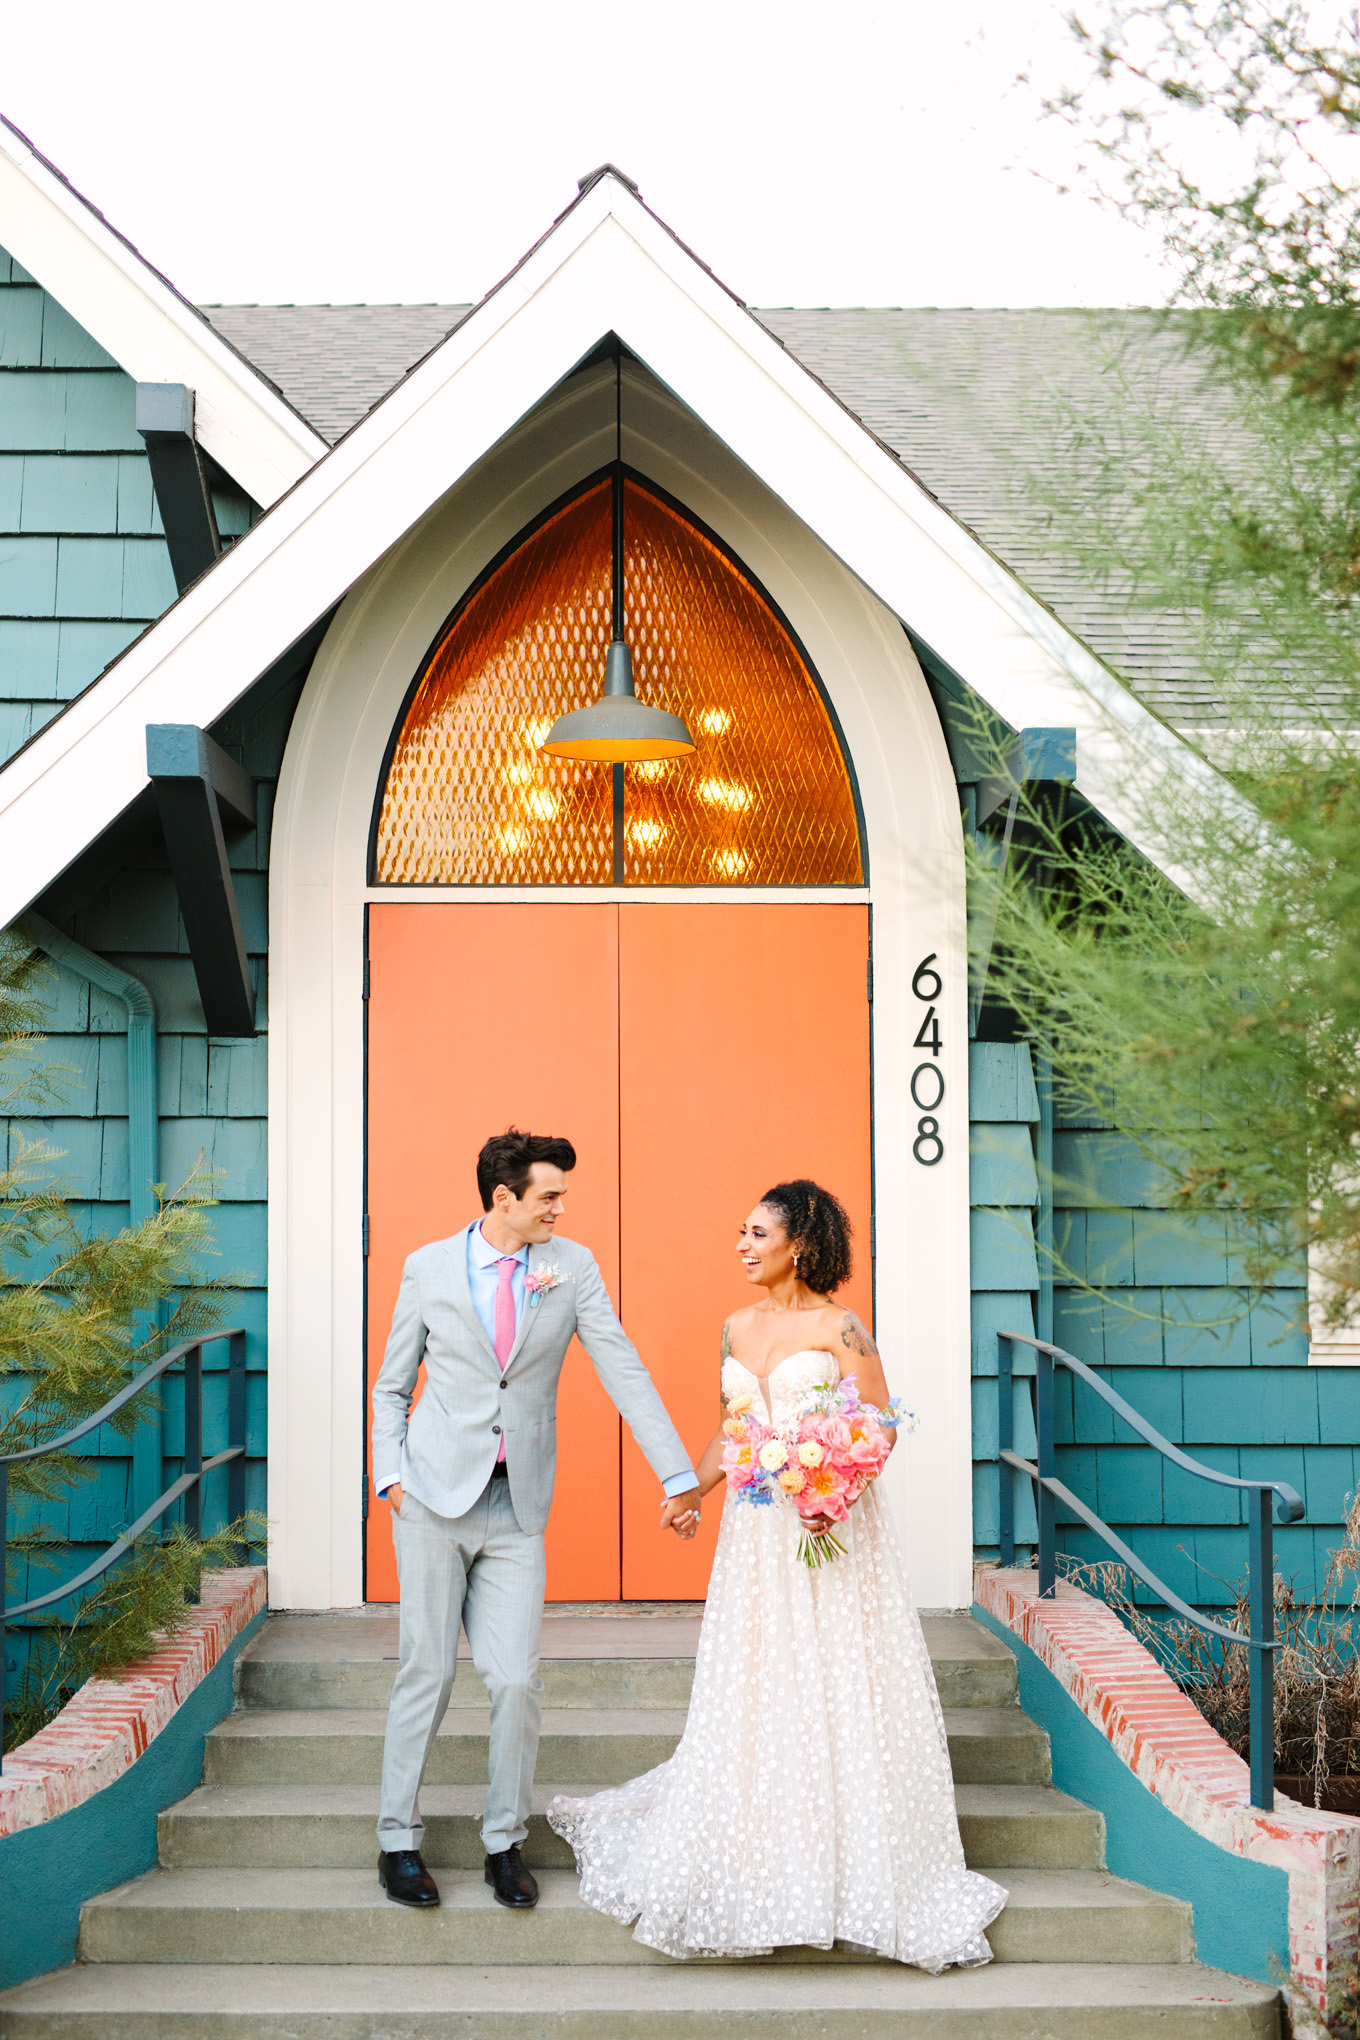 Bride and groom in front of orange doorway | Colorful pop-up micro wedding at The Ruby Street Los Angeles featured on Green Wedding Shoes | Colorful and elevated photography for fun-loving couples in Southern California | #colorfulwedding #popupwedding #weddingphotography #microwedding Source: Mary Costa Photography | Los Angeles